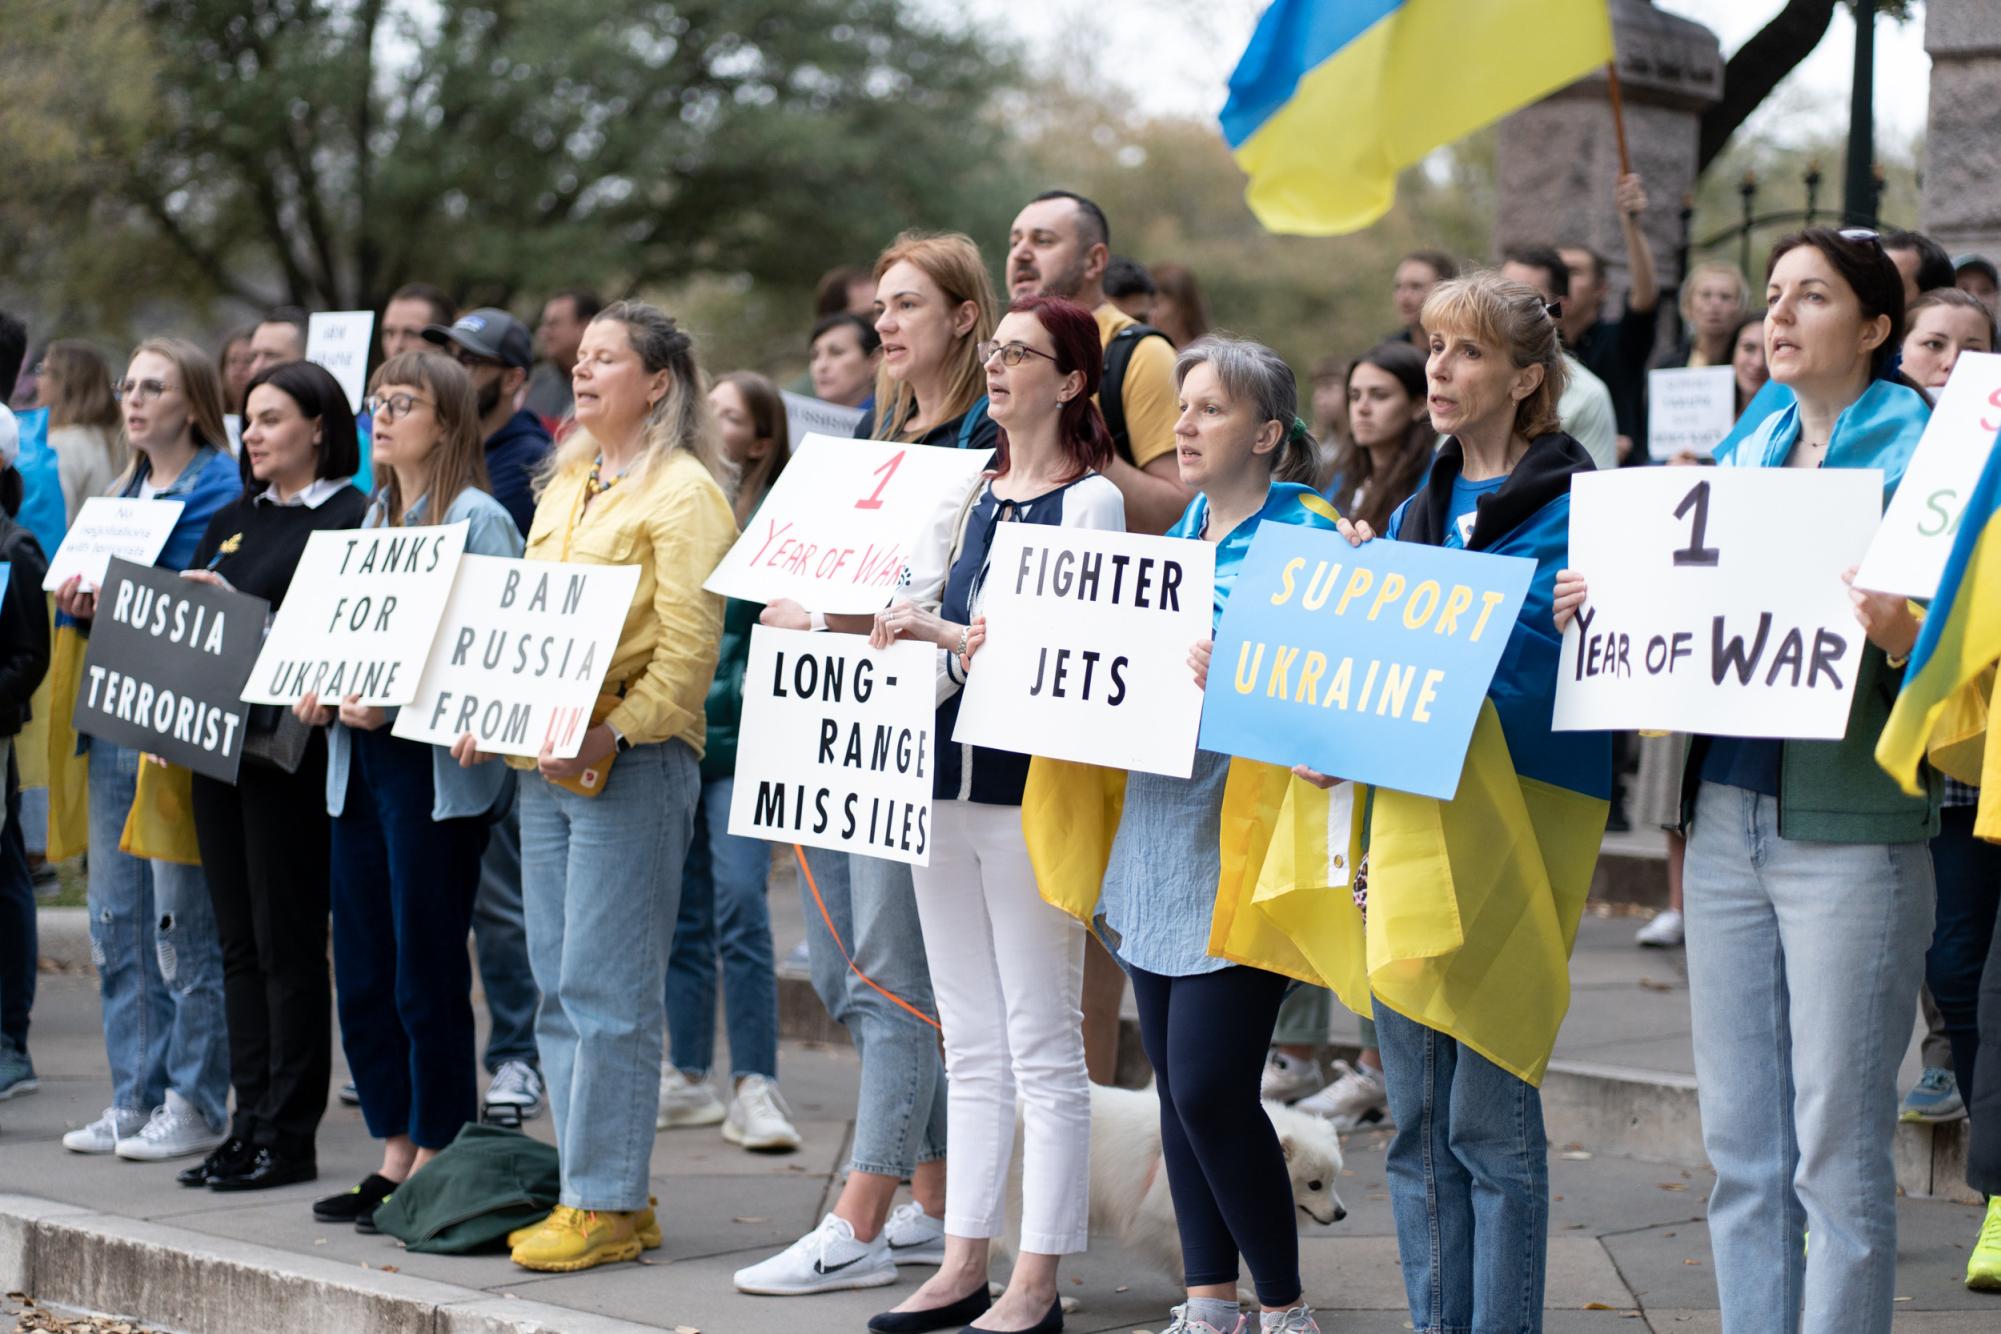 Protestors hold signs advocating increased aid to Ukraine outside the Texas state Capitol building. Darya Ledesma feels that America should give increased aid to Ukraine in the form of weapons and defense materials. According to Ledesma, the discrepancy between Russian and Ukrainian arsenals is too great for Ukraine to quickly win the war. Russia has [weapons] in huge amounts — Ukrainians dont, Ledesma said. Then [Americans] say Okay, were not giving you [weapons] and we expect you to do a spectacular offensive. What are we, animals in the circus? Honestly, I am just frustrated. Photo courtesy of Kate Voinova. 